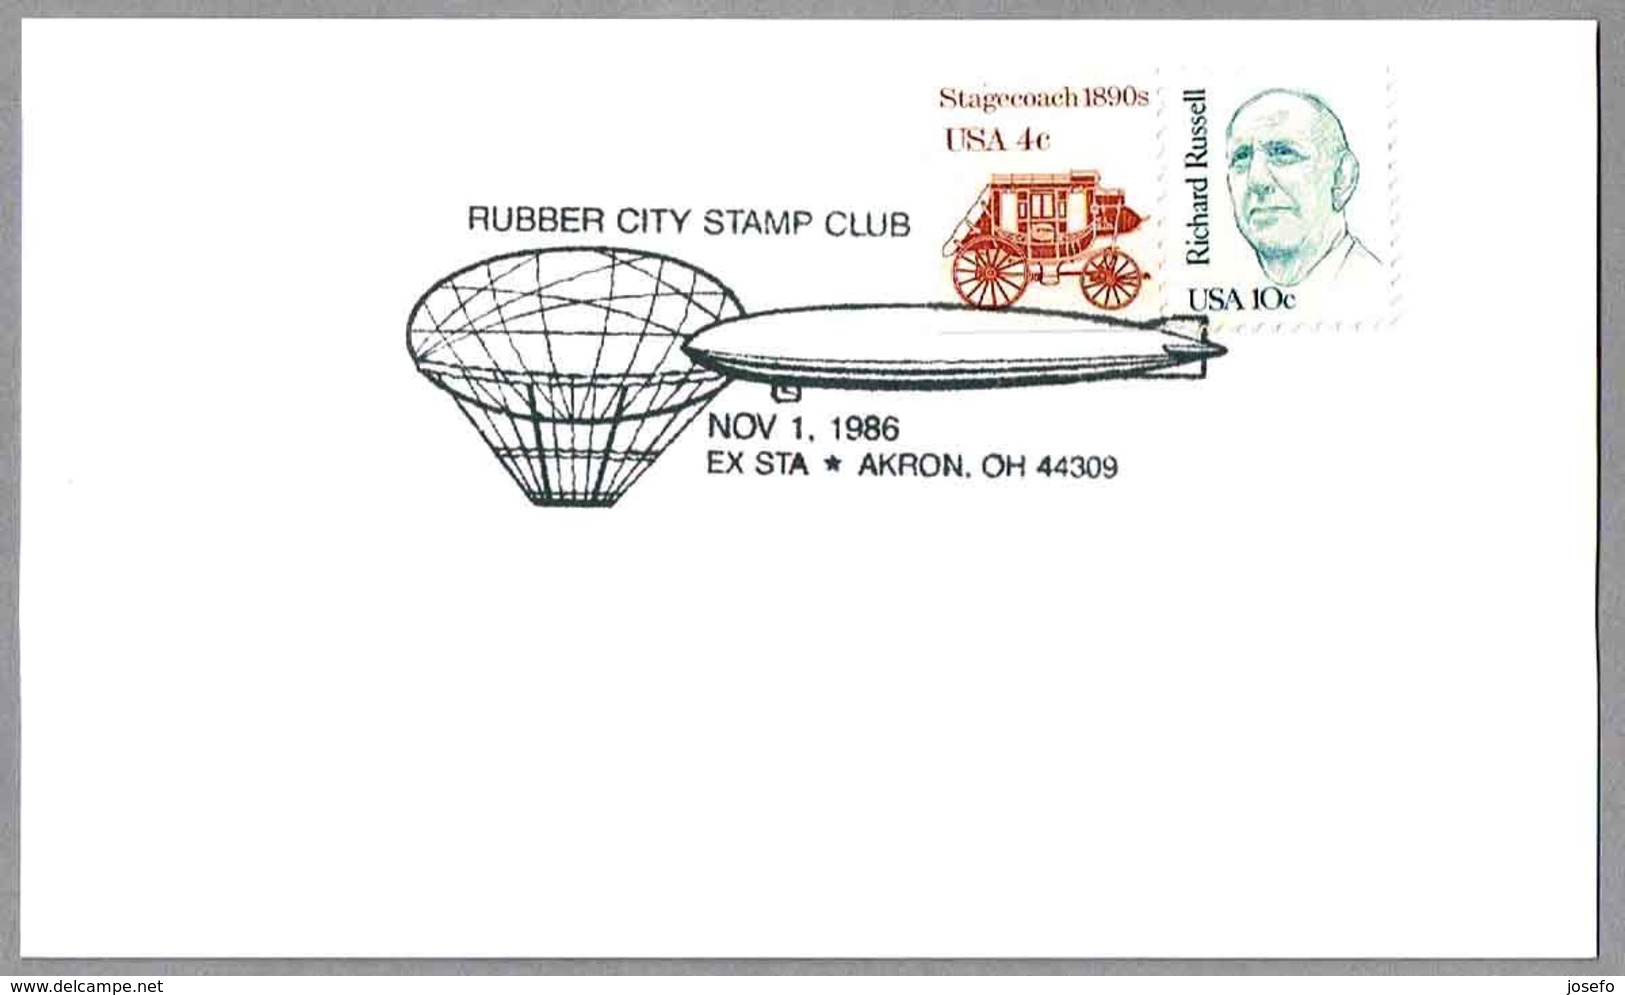 Rubber City Stamp Club - DIRIGIBLE - AIRSHIP. Akron OH 1986 - Montgolfier